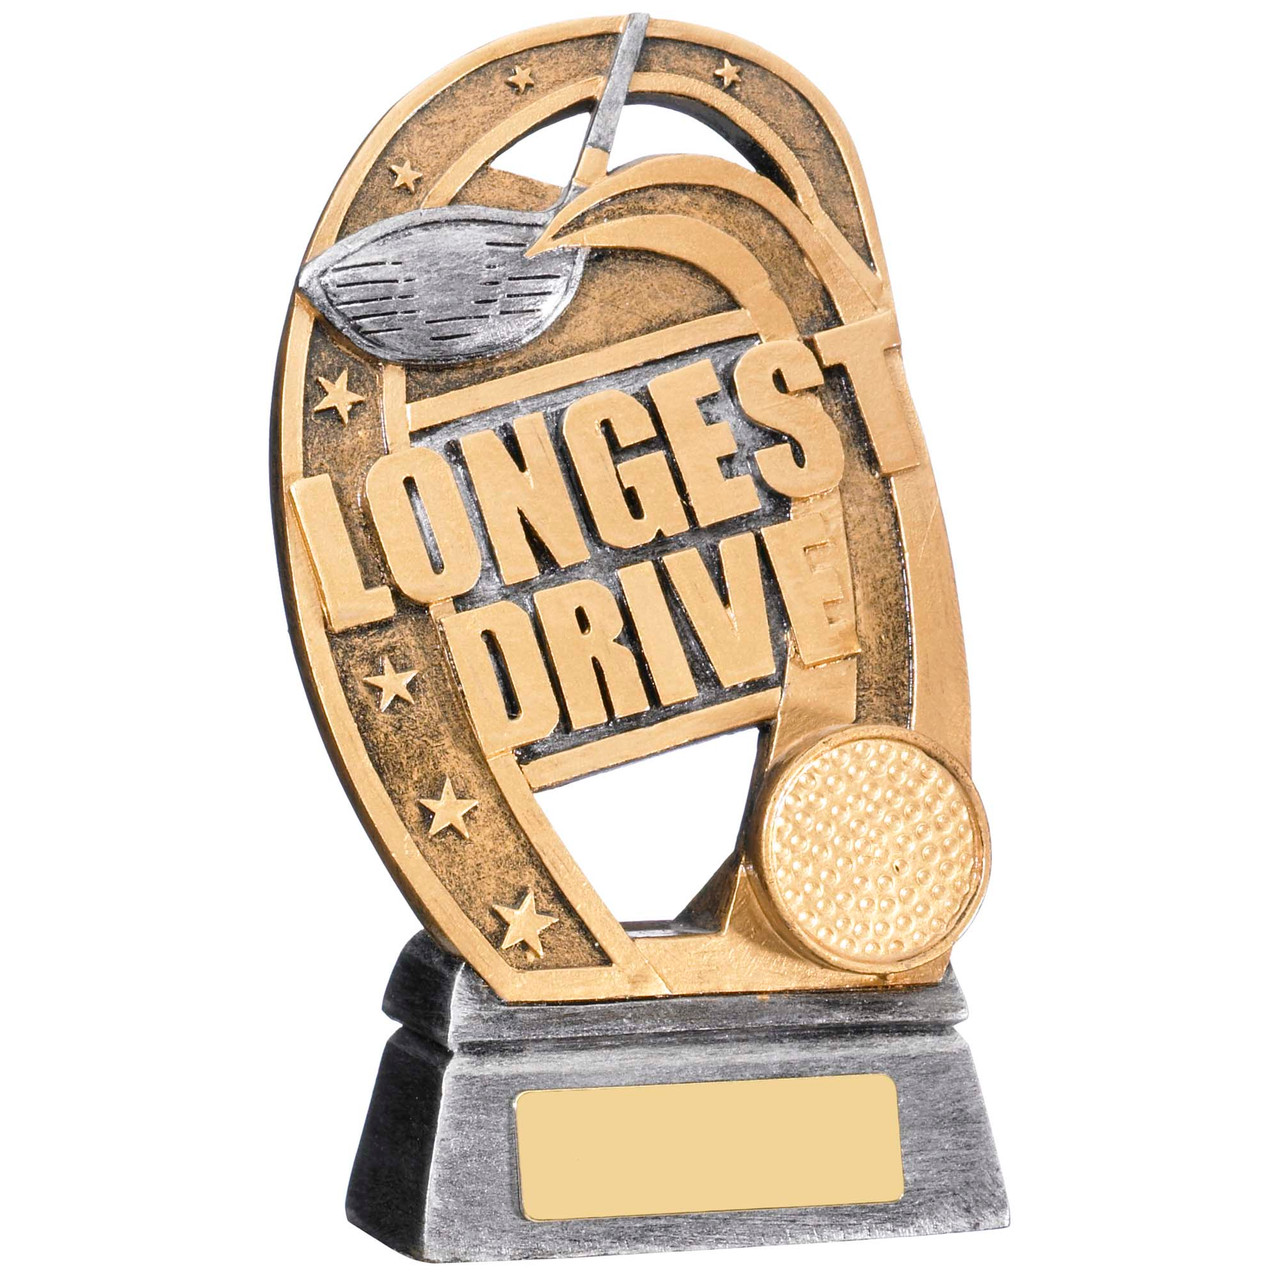 Longest Drive gold award with FREE engraving